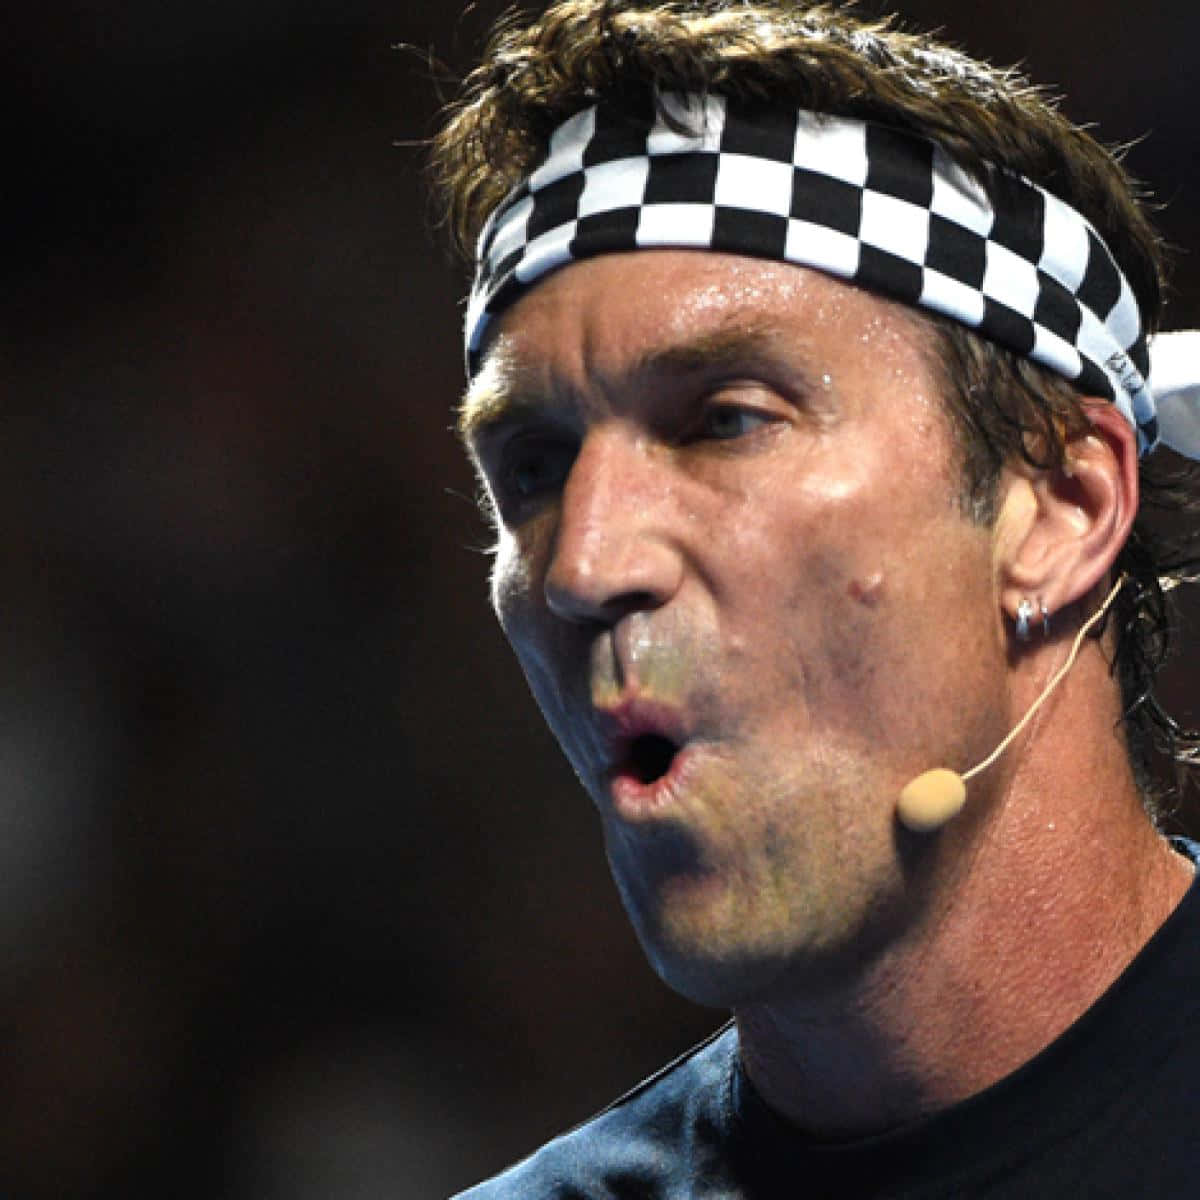 Pat Cash With His Black And White Hair Band Wallpaper